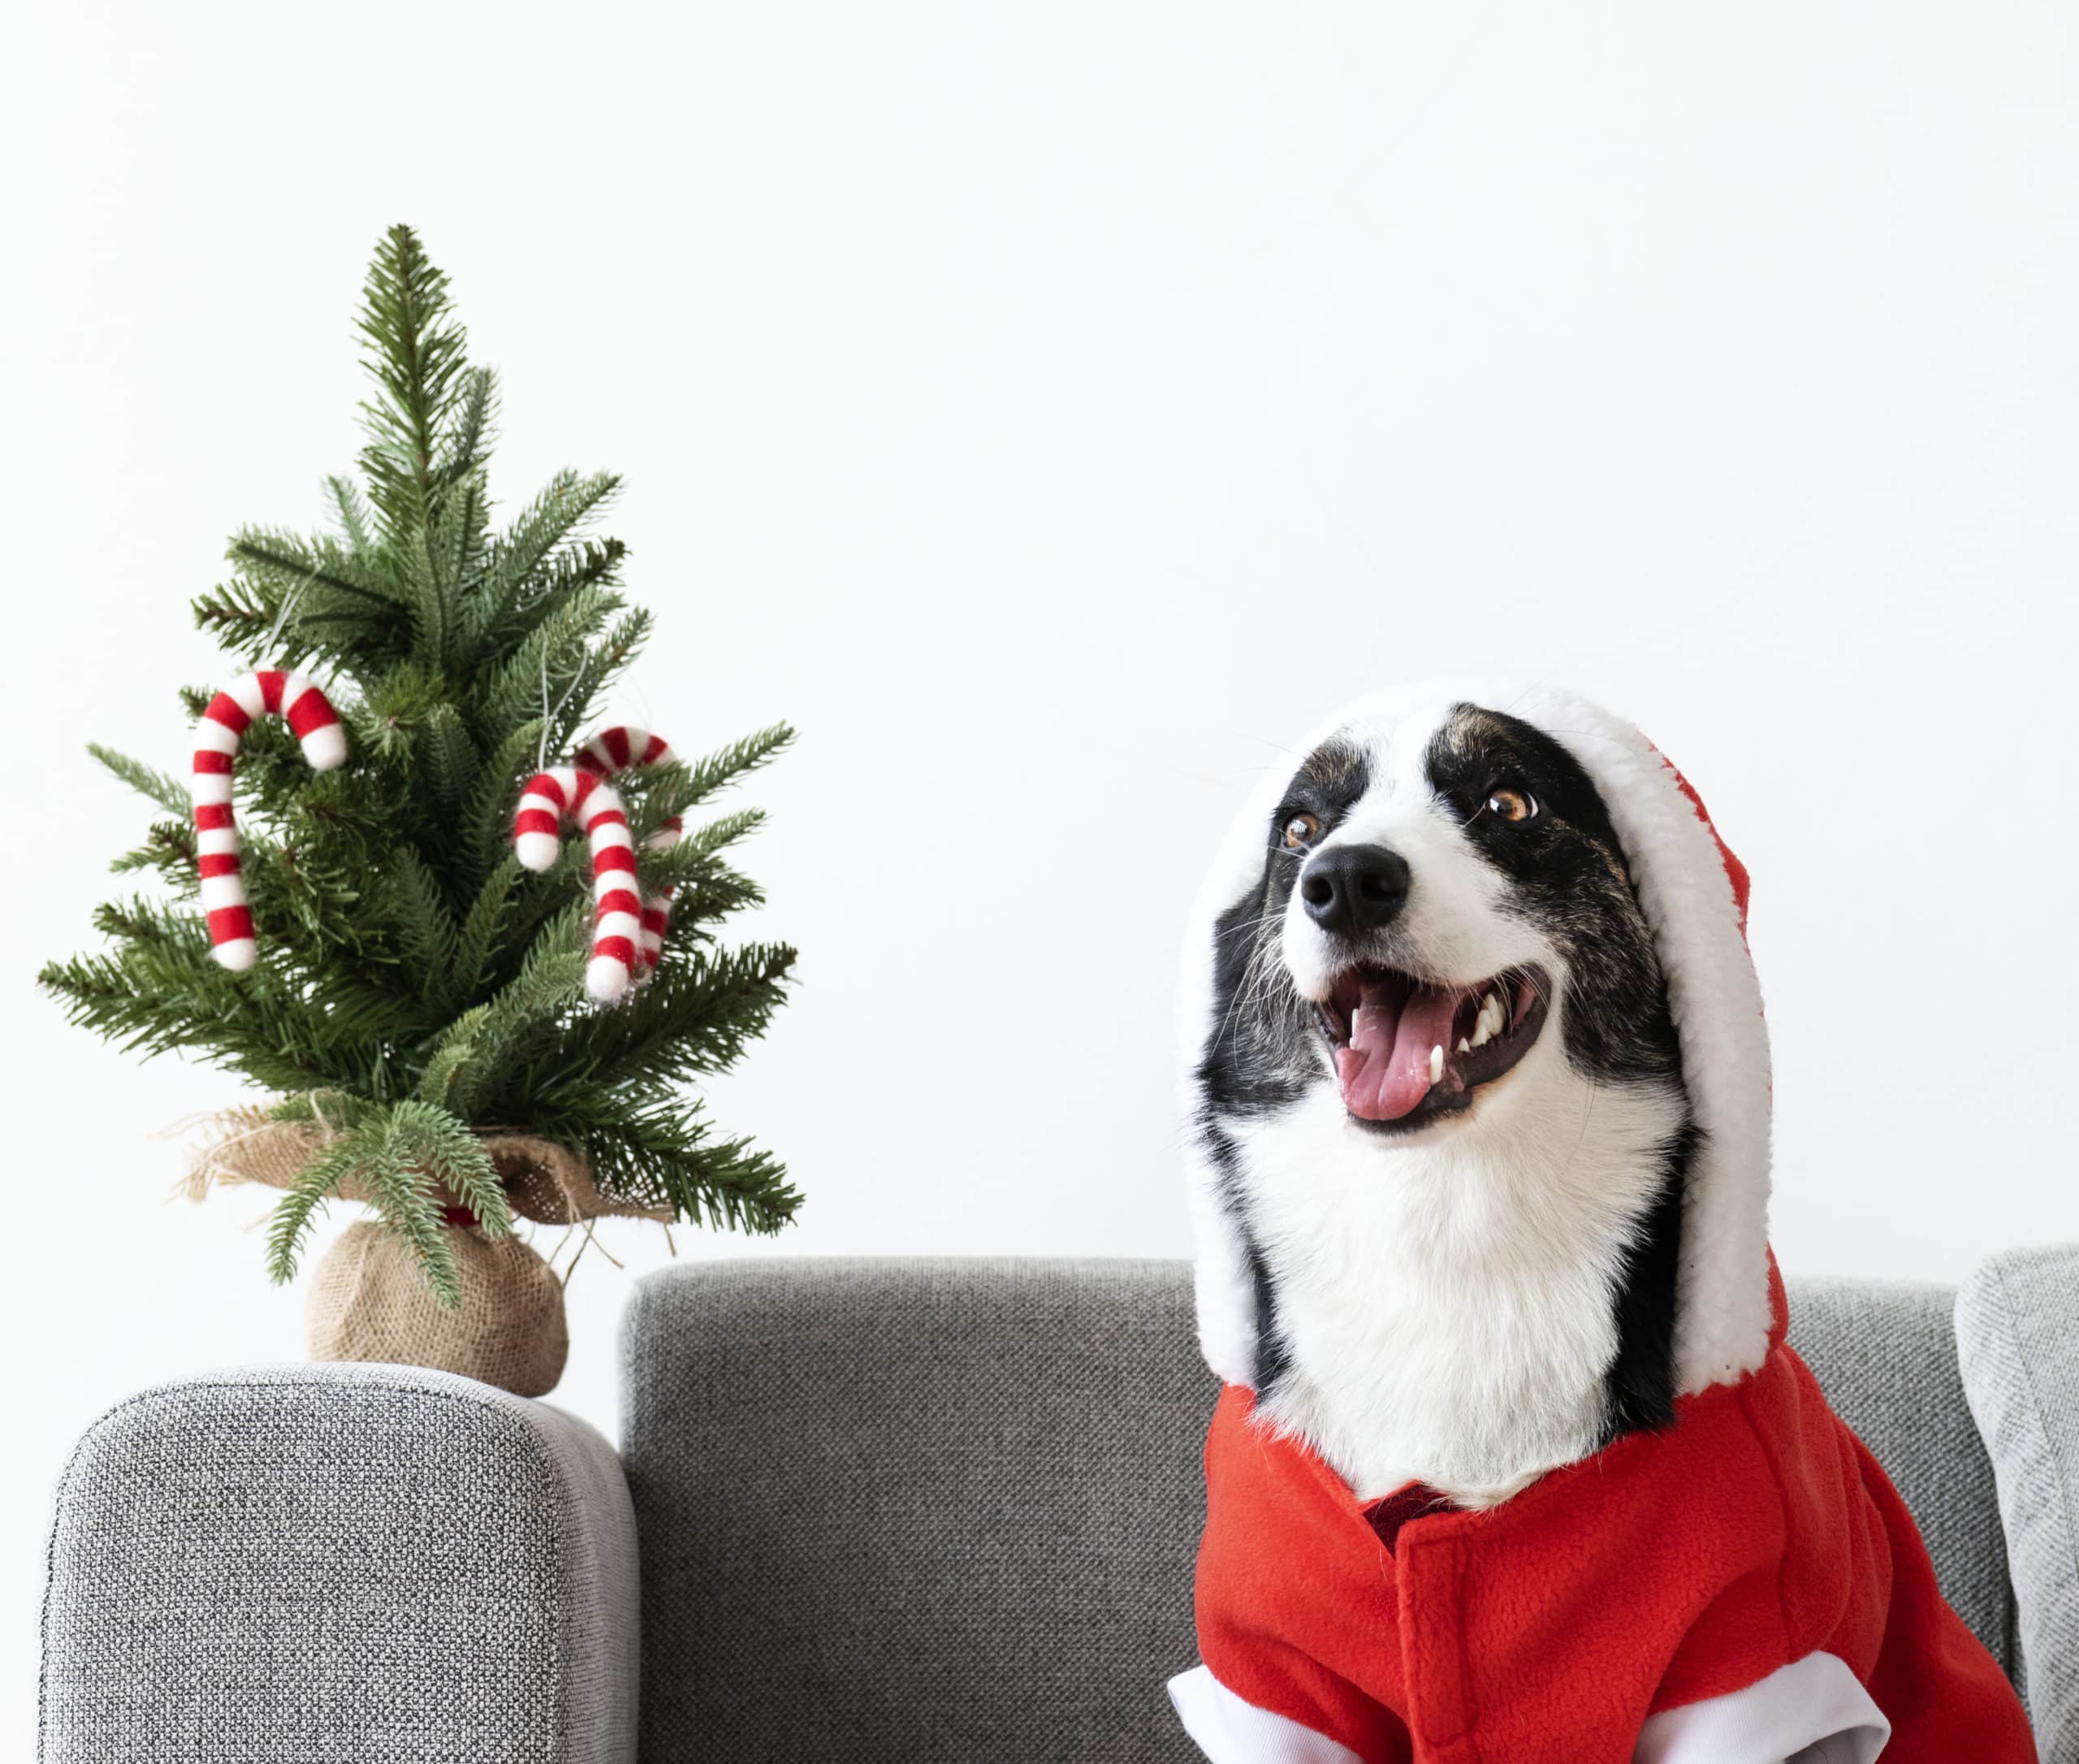 Gifts for dogs and cats